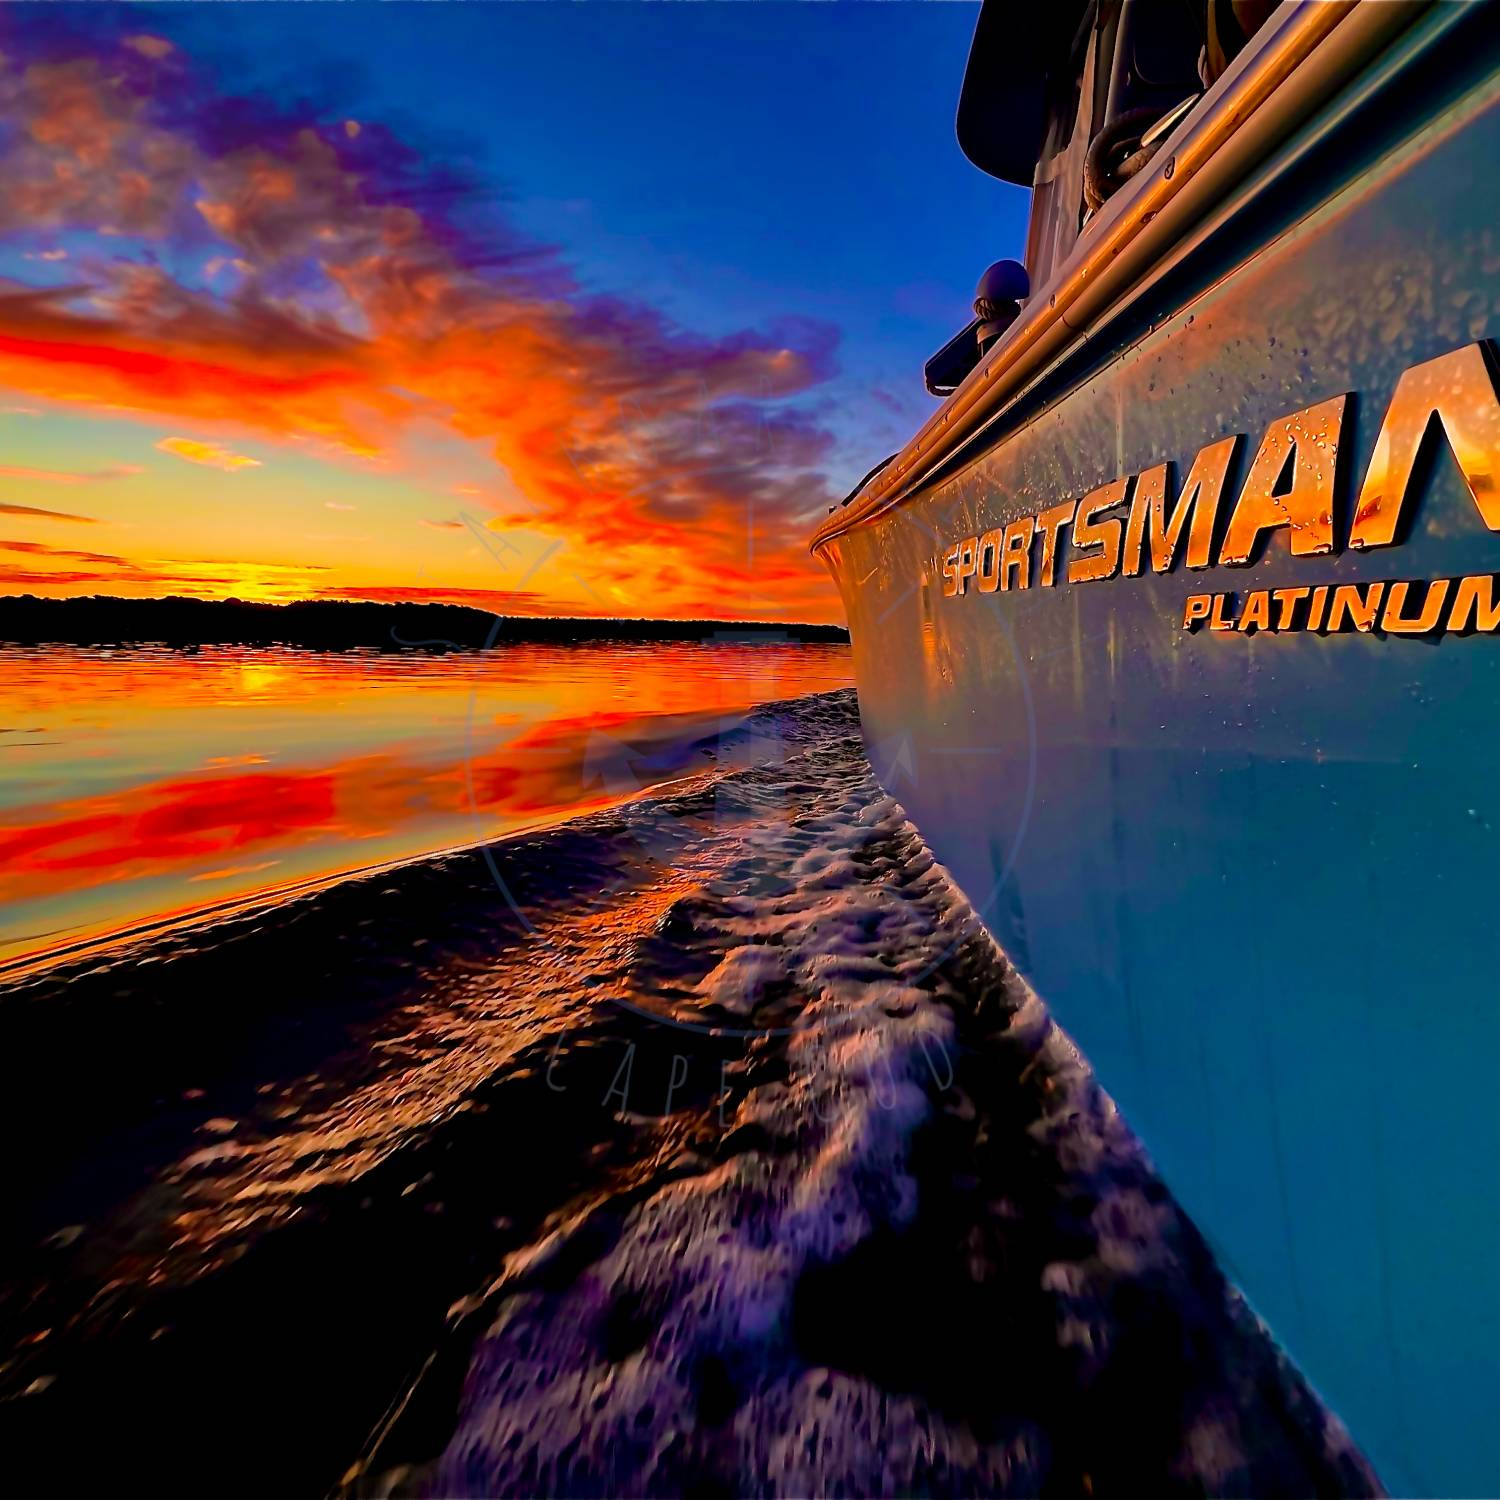 Title: Summer is for sunrises, sunsets, smiles and Sportsman Boats - On board their Sportsman Heritage 231 Center Console - Location: Waquoit Bay, Falmouth Massachusetts. Participating in the Photo Contest #SportsmanOctober